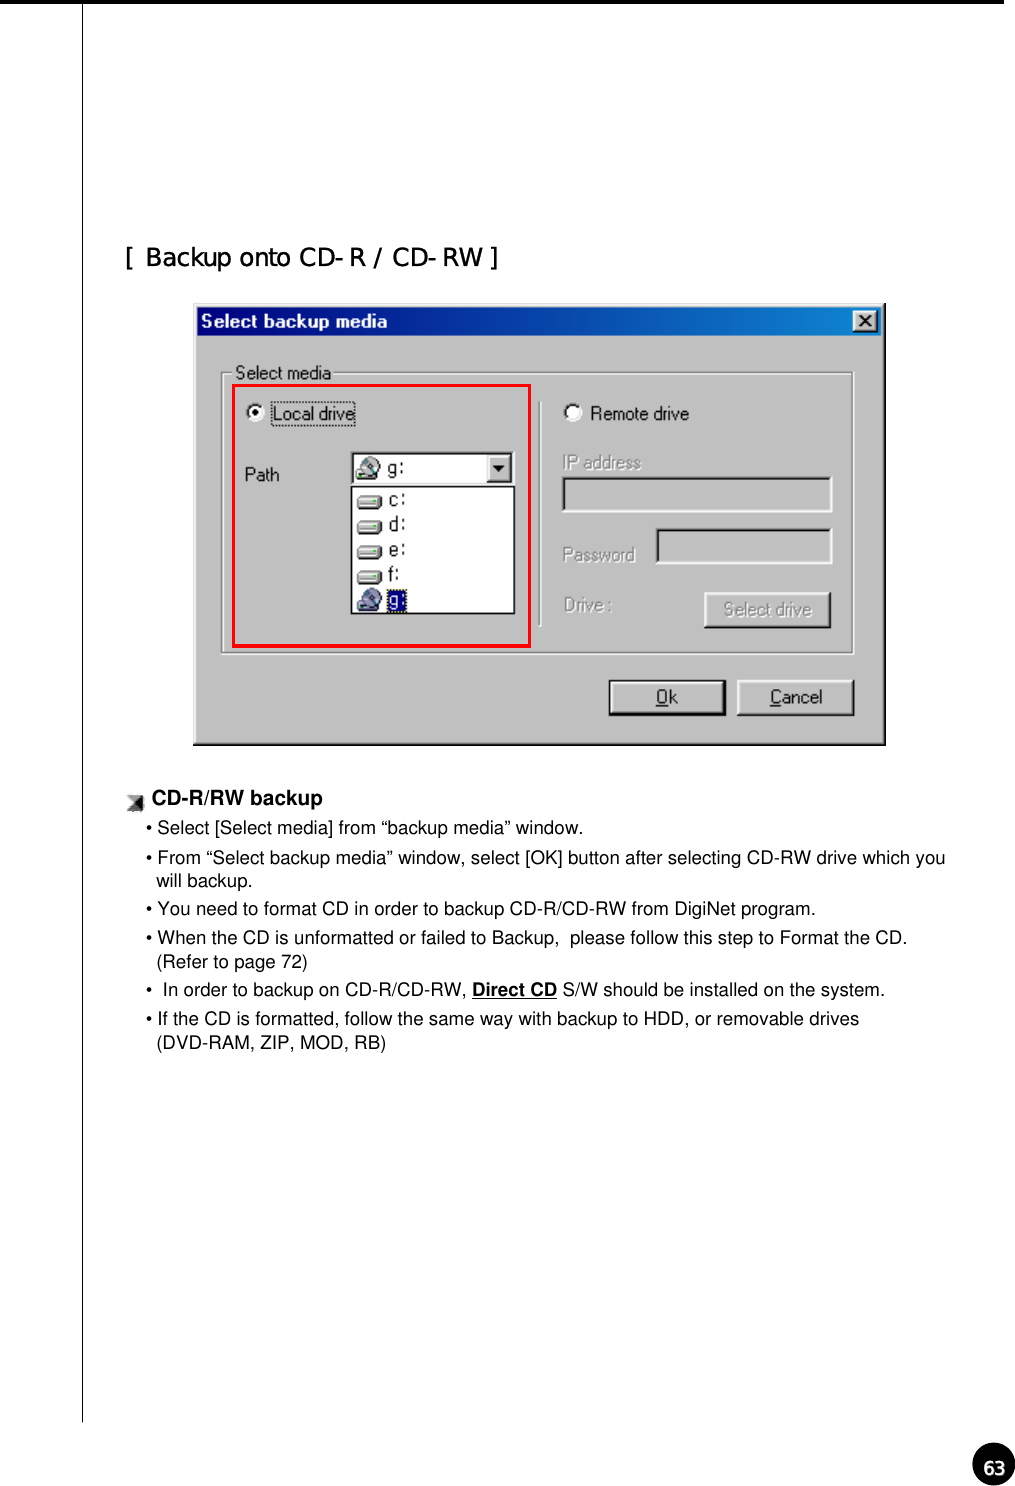 6363CD-R/RW backup• Select [Select media] from “backup media” window.• From “Select backup media” window, select [OK] button after selecting CD-RW drive which you will backup.• You need to format CD in order to backup CD-R/CD-RW from DigiNet program.• When the CD is unformatted or failed to Backup,  please follow this step to Format the CD. (Refer to page 72)• In order to backup on CD-R/CD-RW, Direct CD S/W should be installed on the system.• If the CD is formatted, follow the same way with backup to HDD, or removable drives (DVD-RAM, ZIP, MOD, RB)[ Backup onto CD-R / CD-RW ]